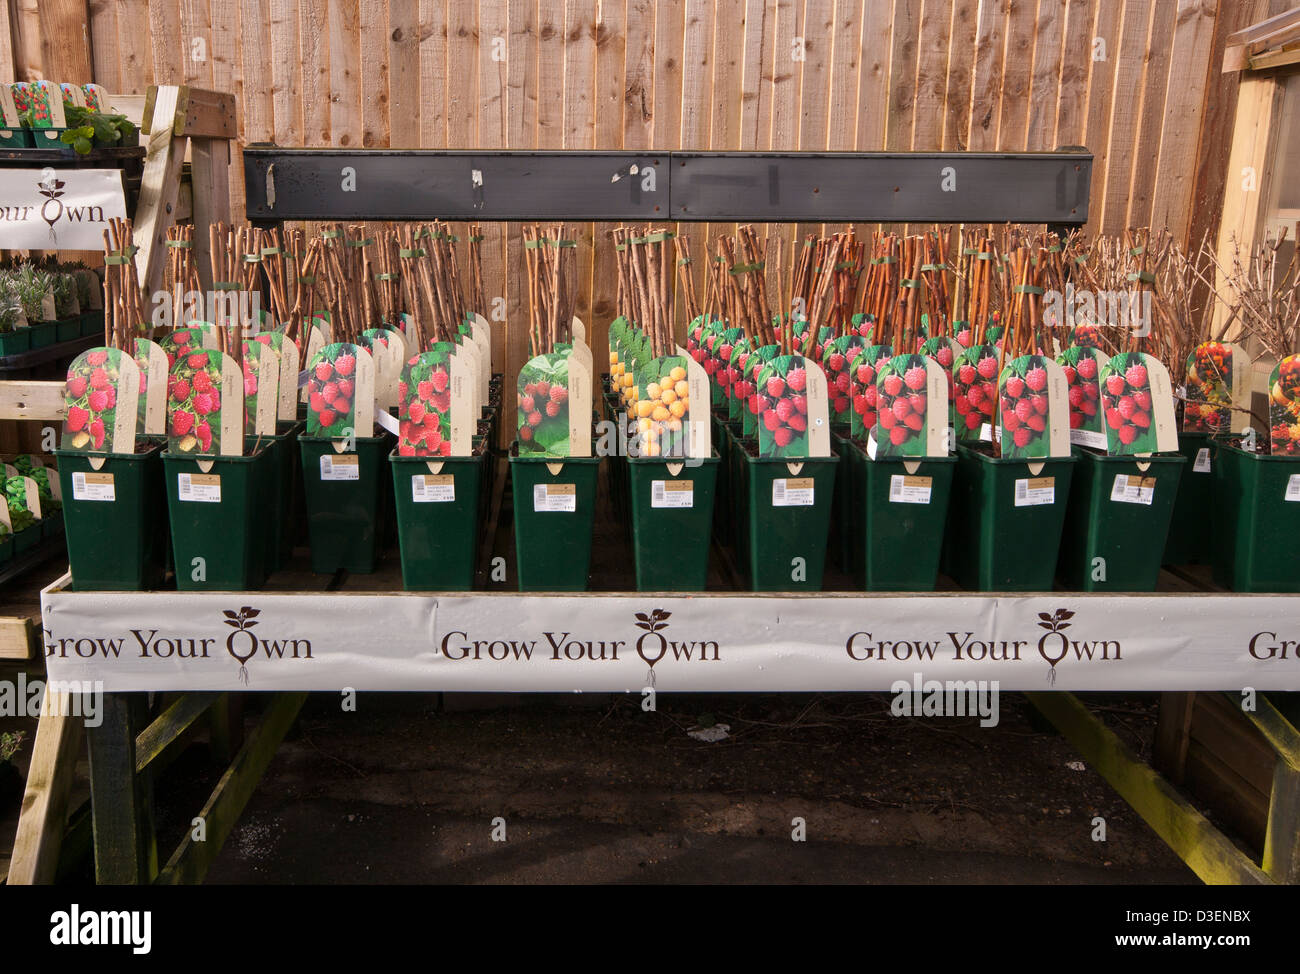 Garden Centre Display Of Potted Soft Fruit Canes For Sale Stock Photo